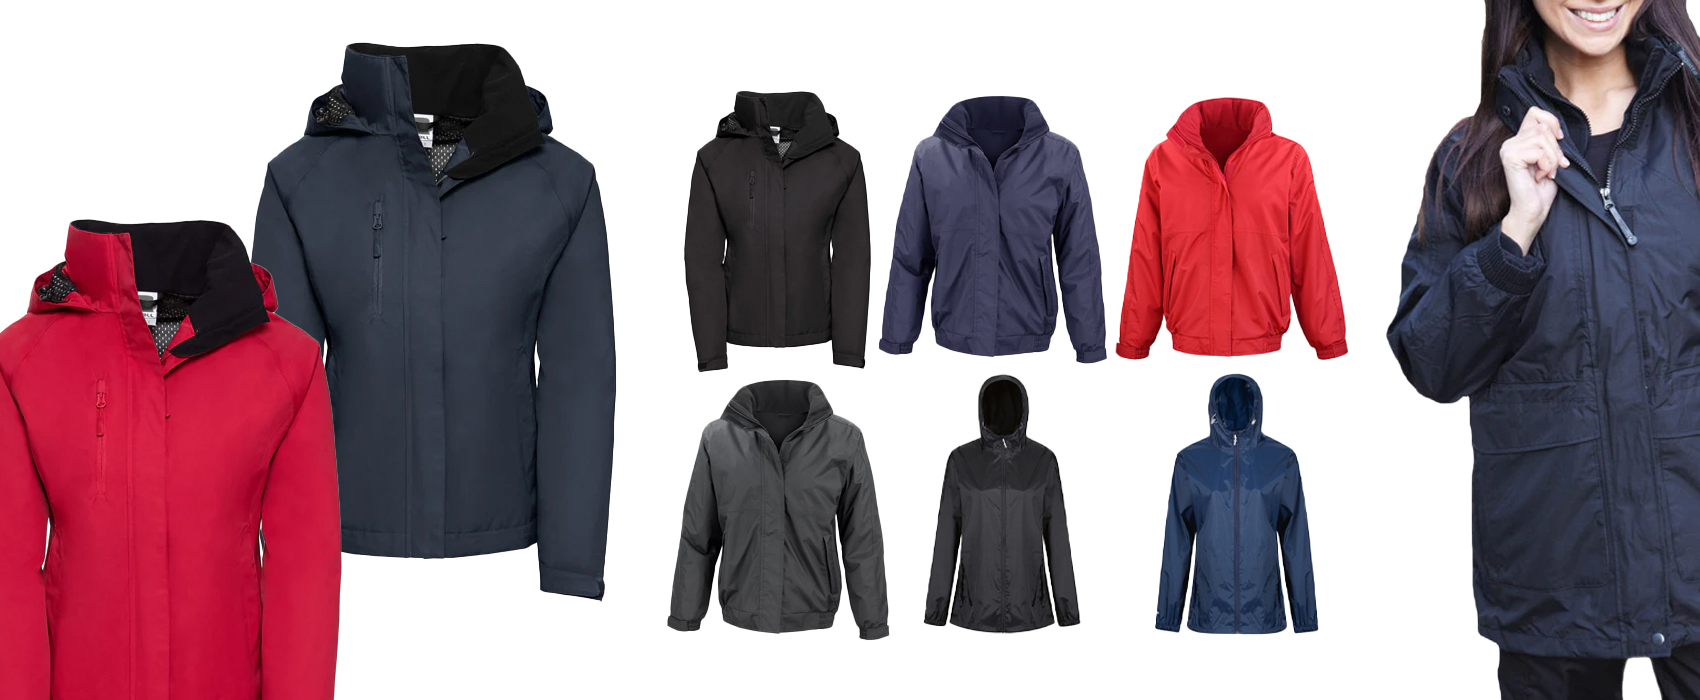 Top Womens Waterproof Jackets for Logistics Workers: A Buying Guide